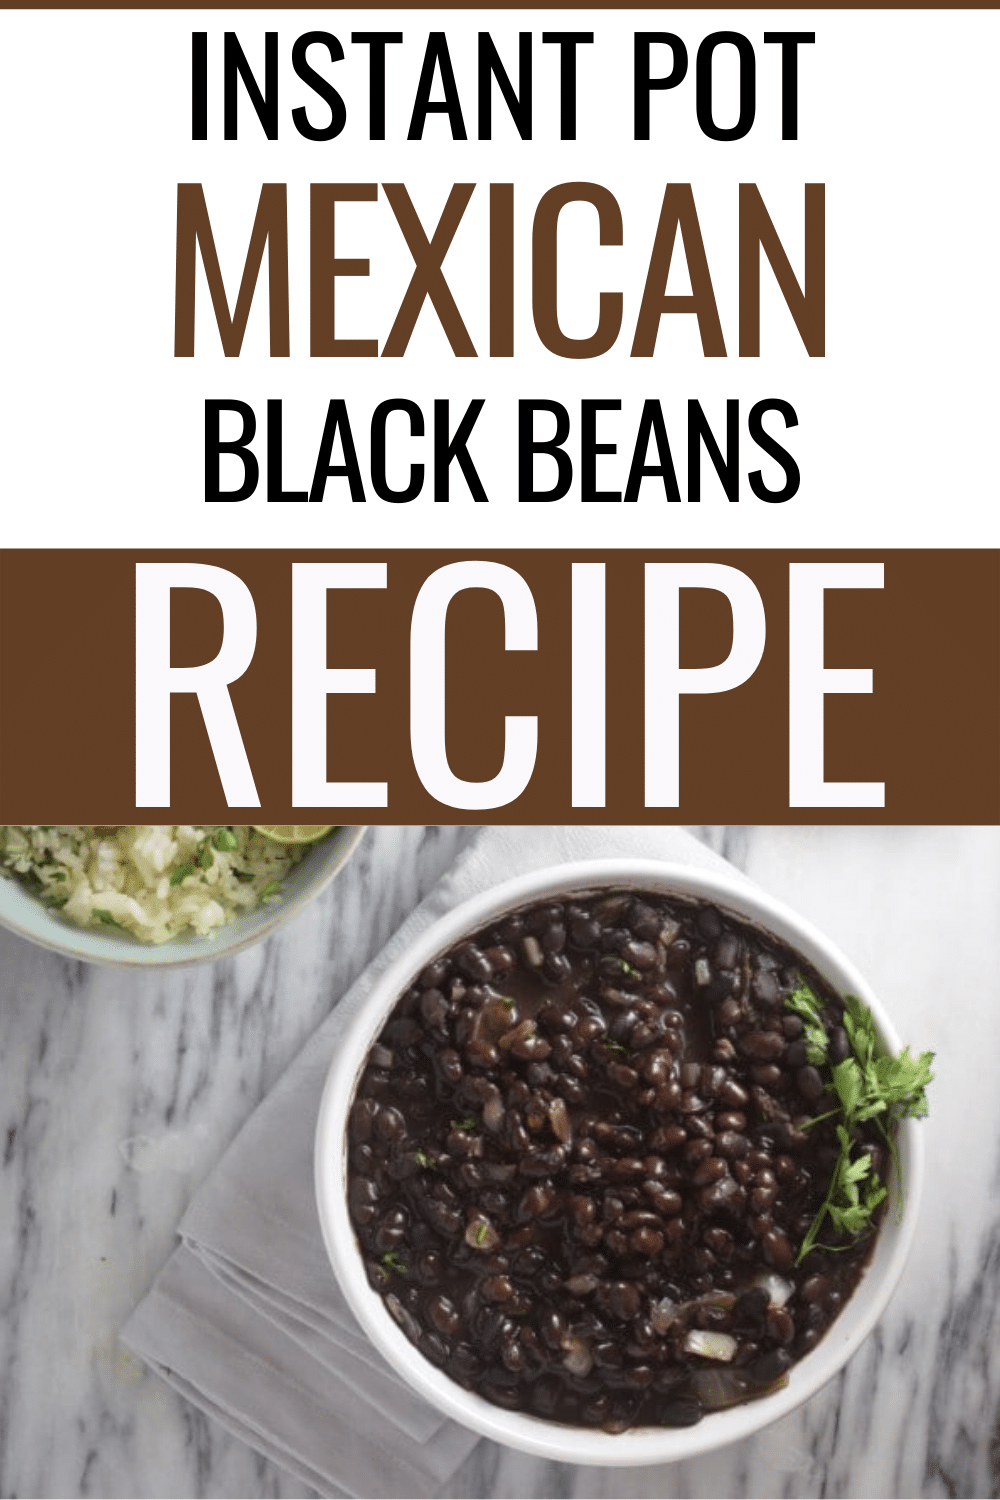 These Instant Pot Mexican Black Beans are the perfect Mexican side dish. Delicious, nutritious, and SO easy to make! #instantpot #pressurecooker #Mexican #blackbeans #sidedish via @wondermomwannab